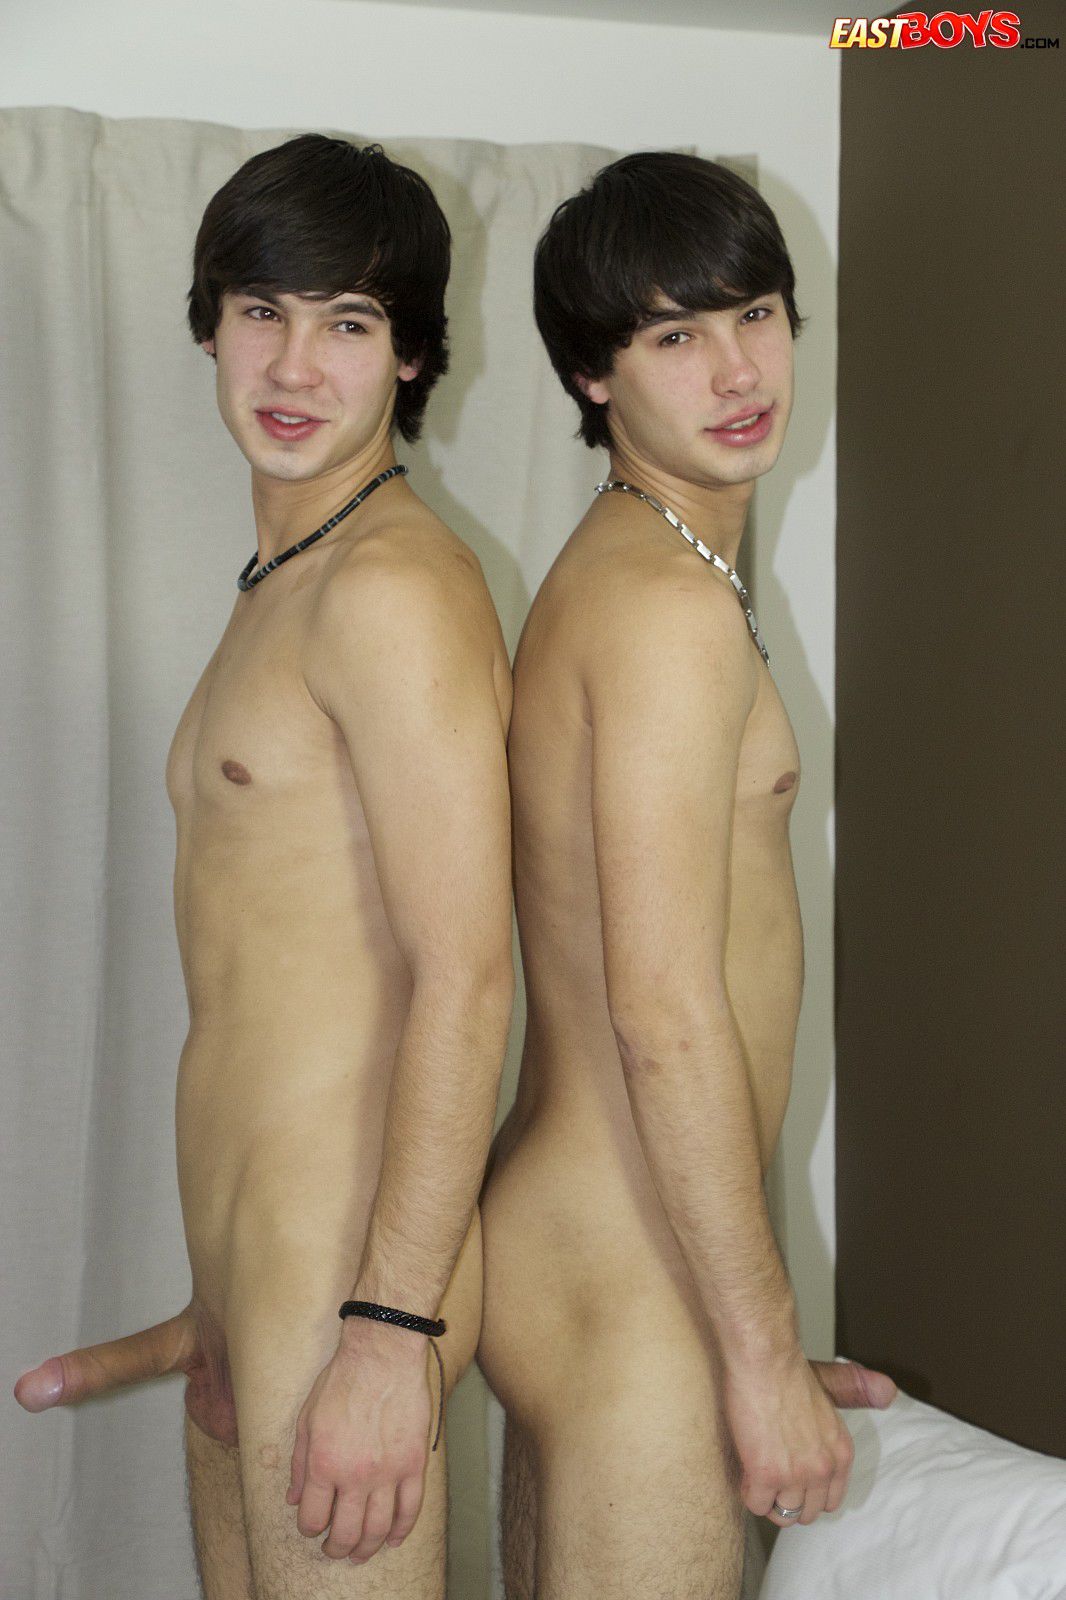 Gay Aston Twins Search Xvideos Com nude pic, sex photos Gay Aston Twins S.....